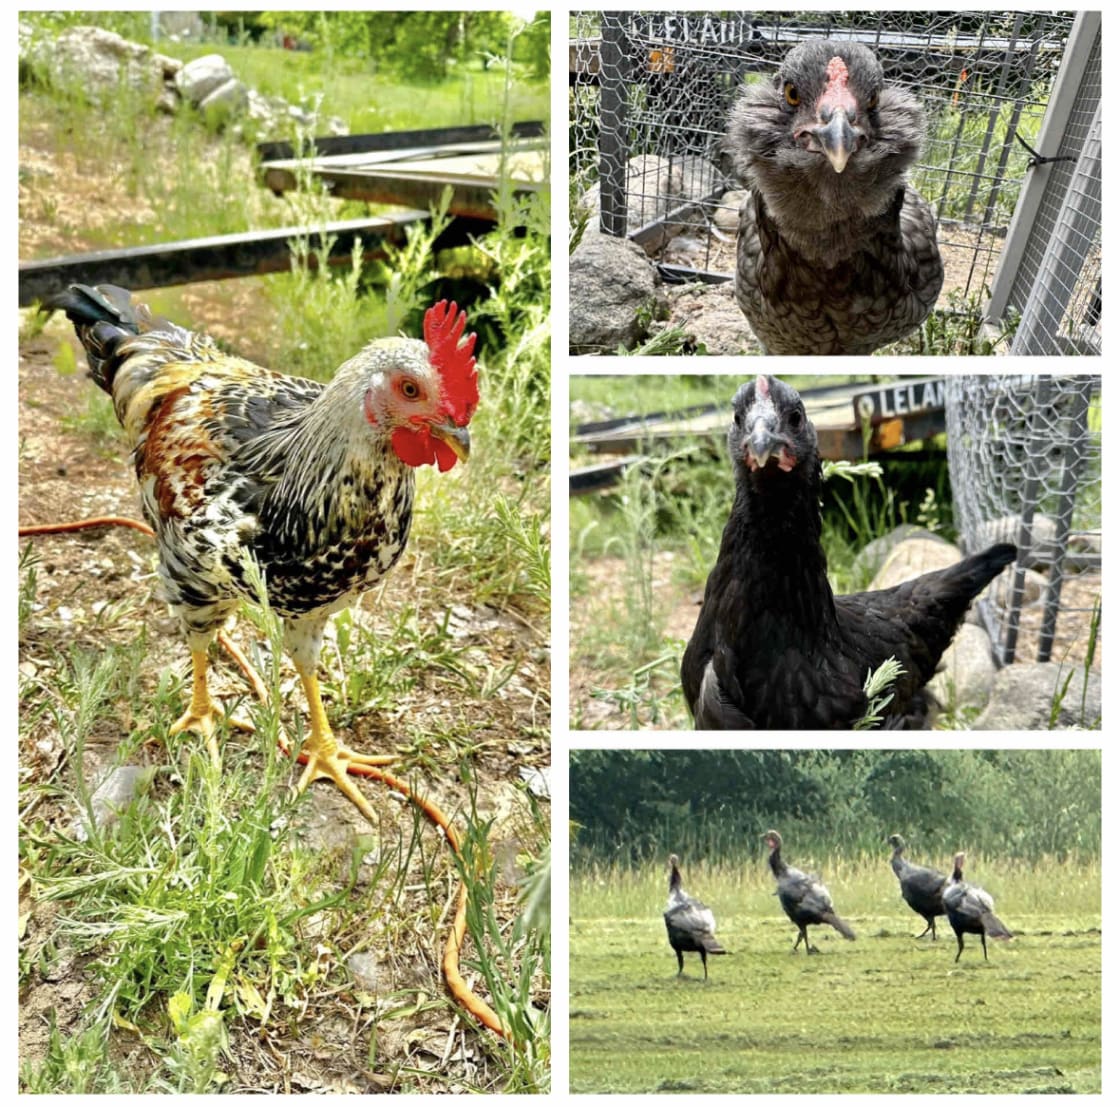 Enjoy watching turkeys & deer frequently walk through the yard and visit with our chickens beside the detached garage in the chicken coop.